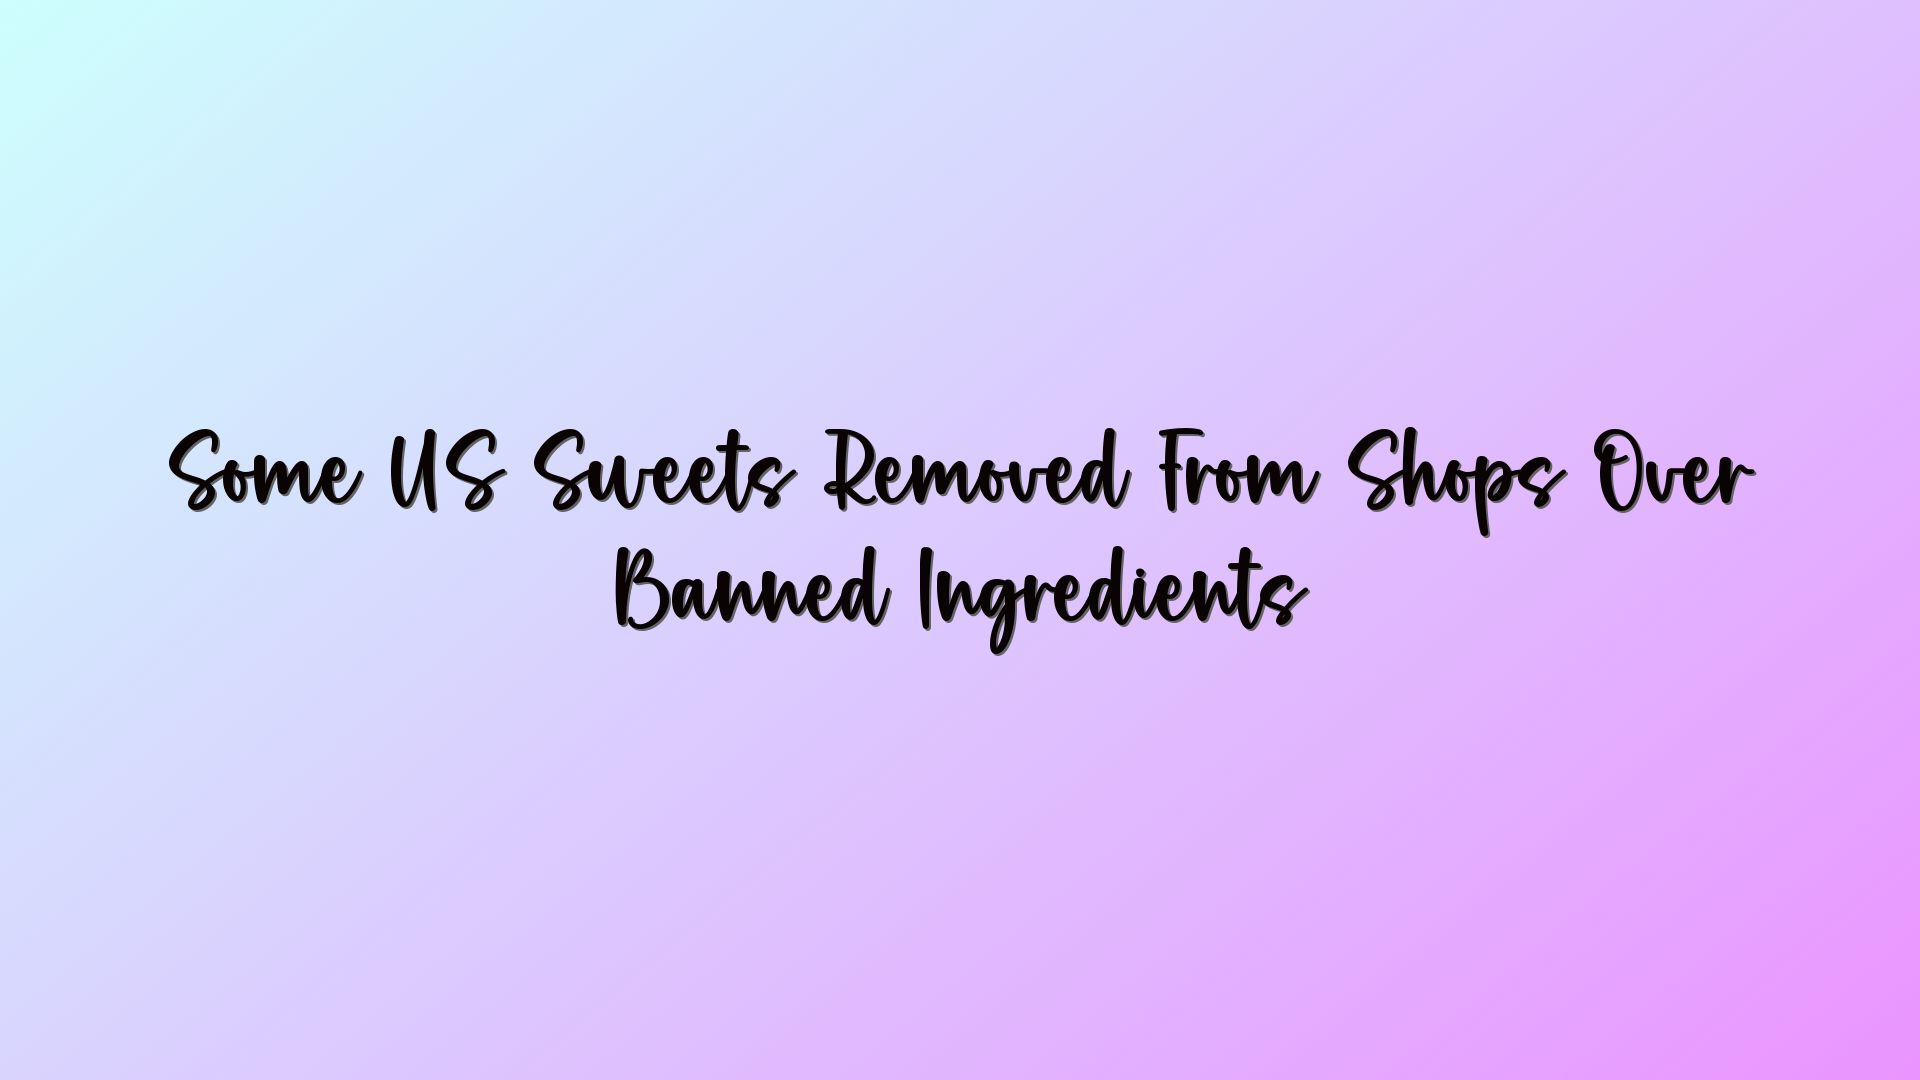 Some US Sweets Removed From Shops Over Banned Ingredients